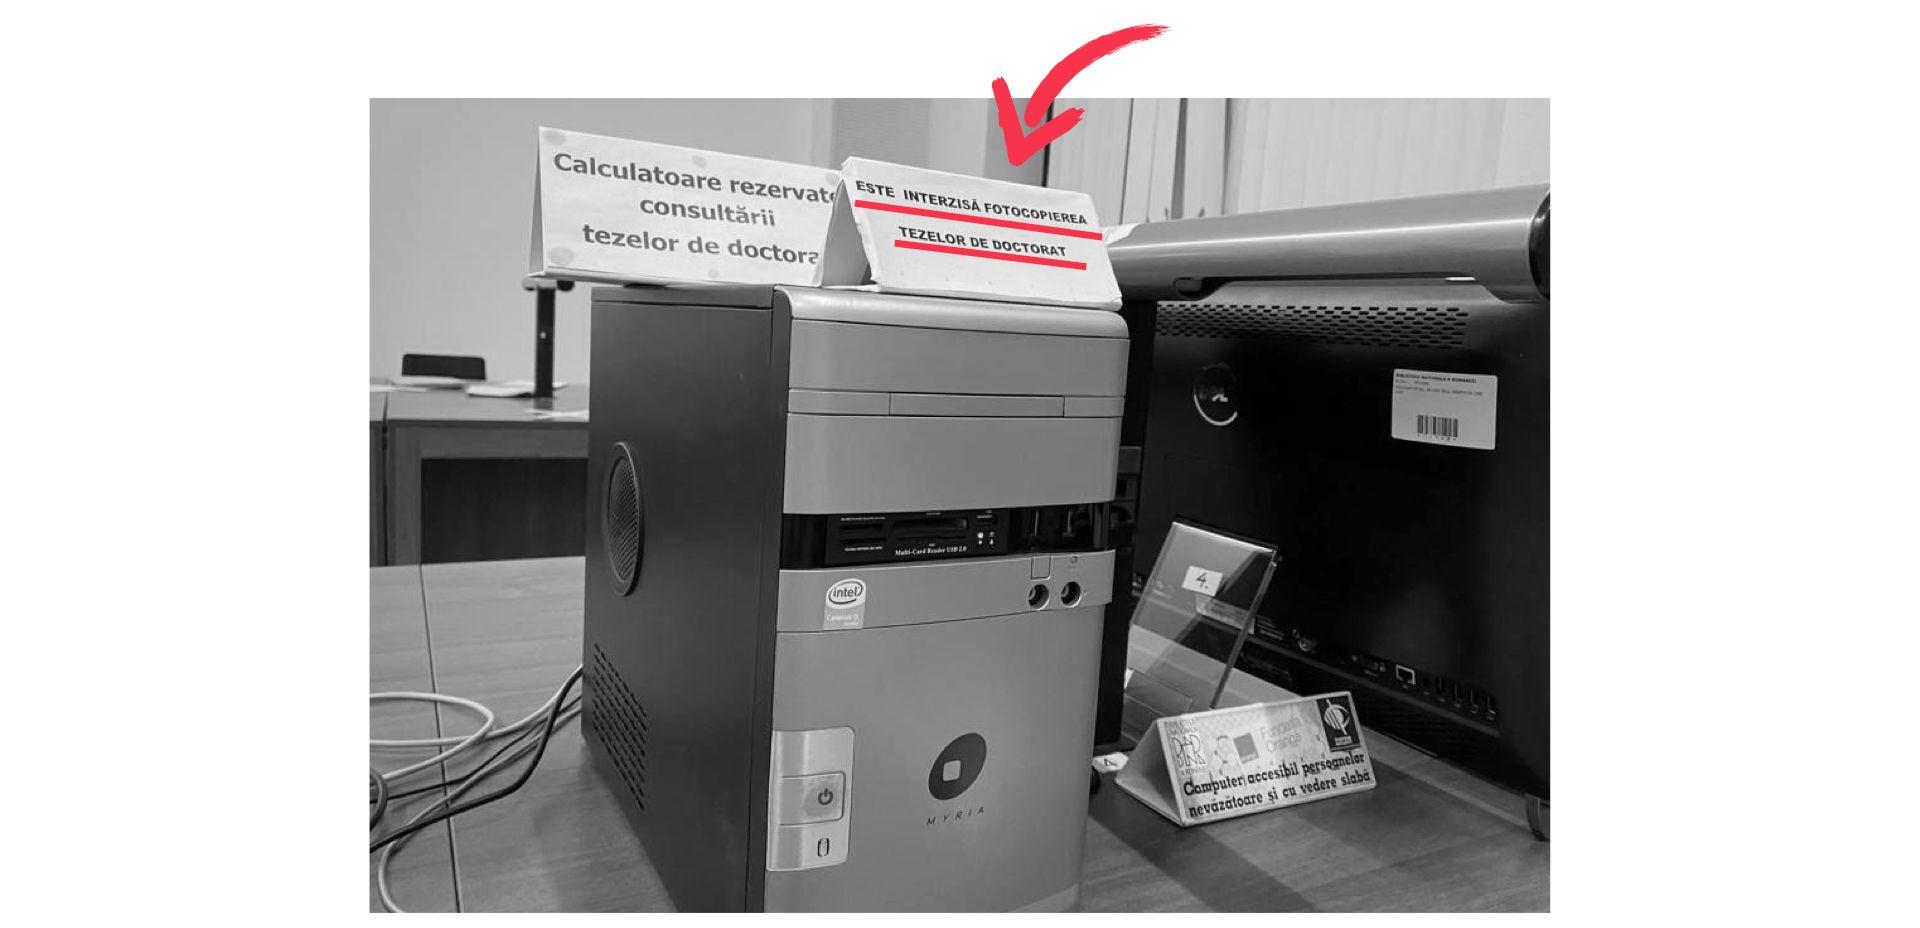 Computers reserved for consulting PhD theses at the National Library. The sign reads: “Photographing the PhD theses is prohibited”.